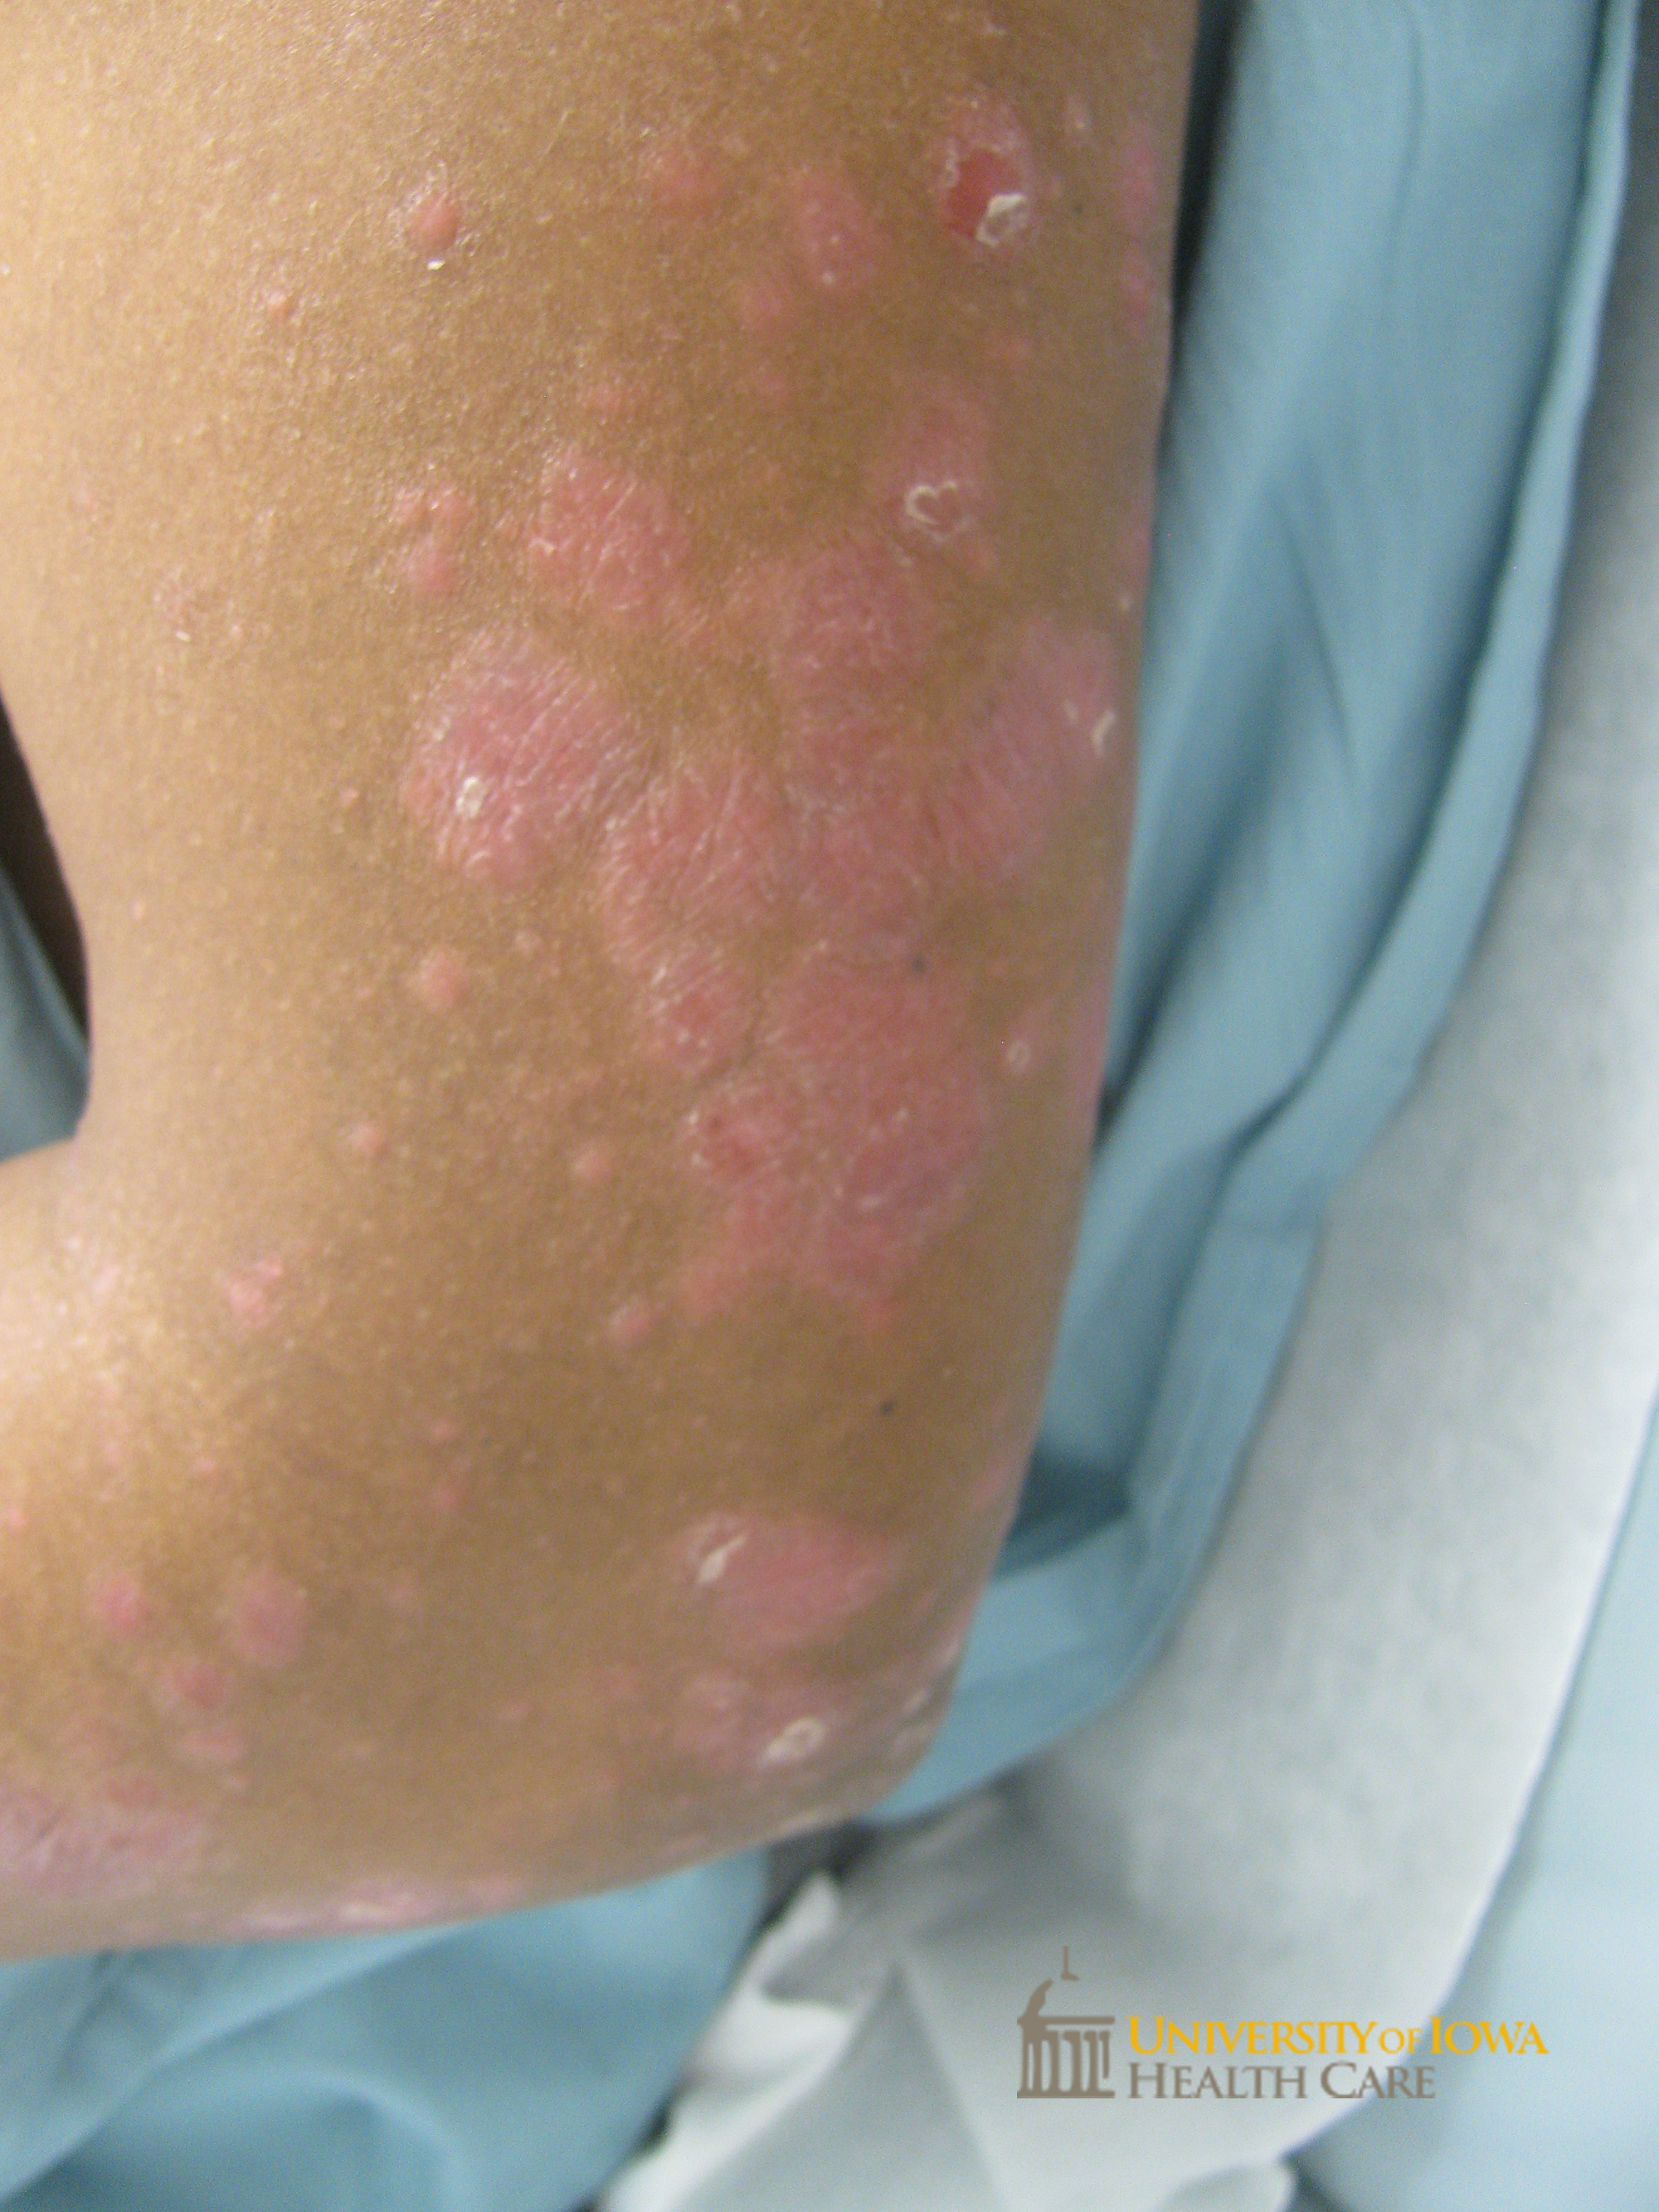 Salmon-colored scaly papules and plaques on the arm. (click images for higher resolution).